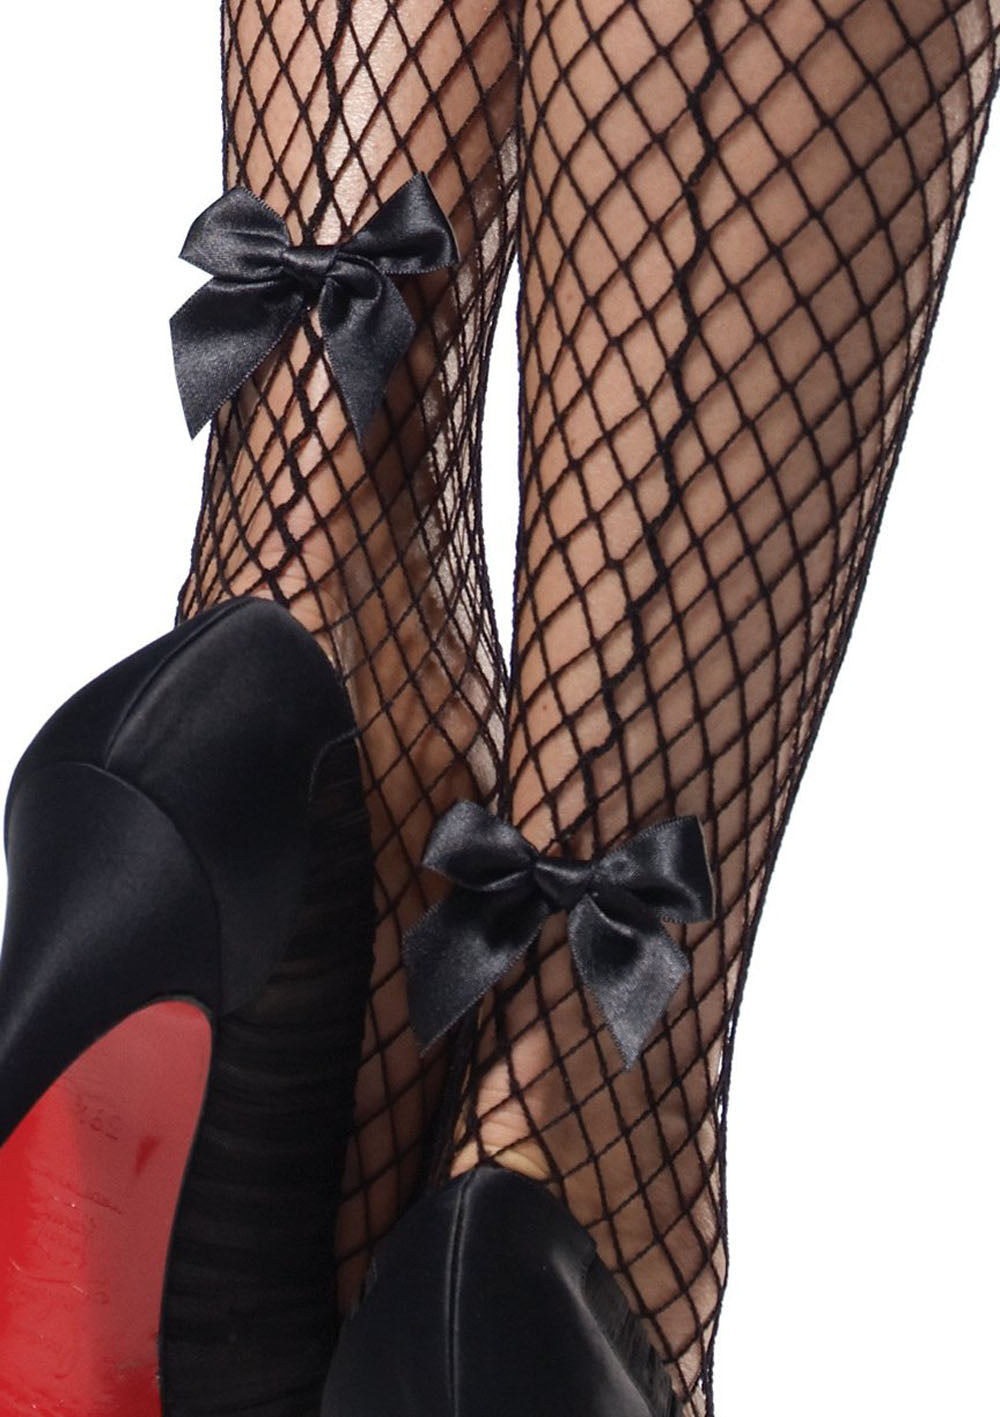 Stay Up Industrial Net Backseam Thigh Highs With Lace Top and Satin Bow Accent - One Size - Black